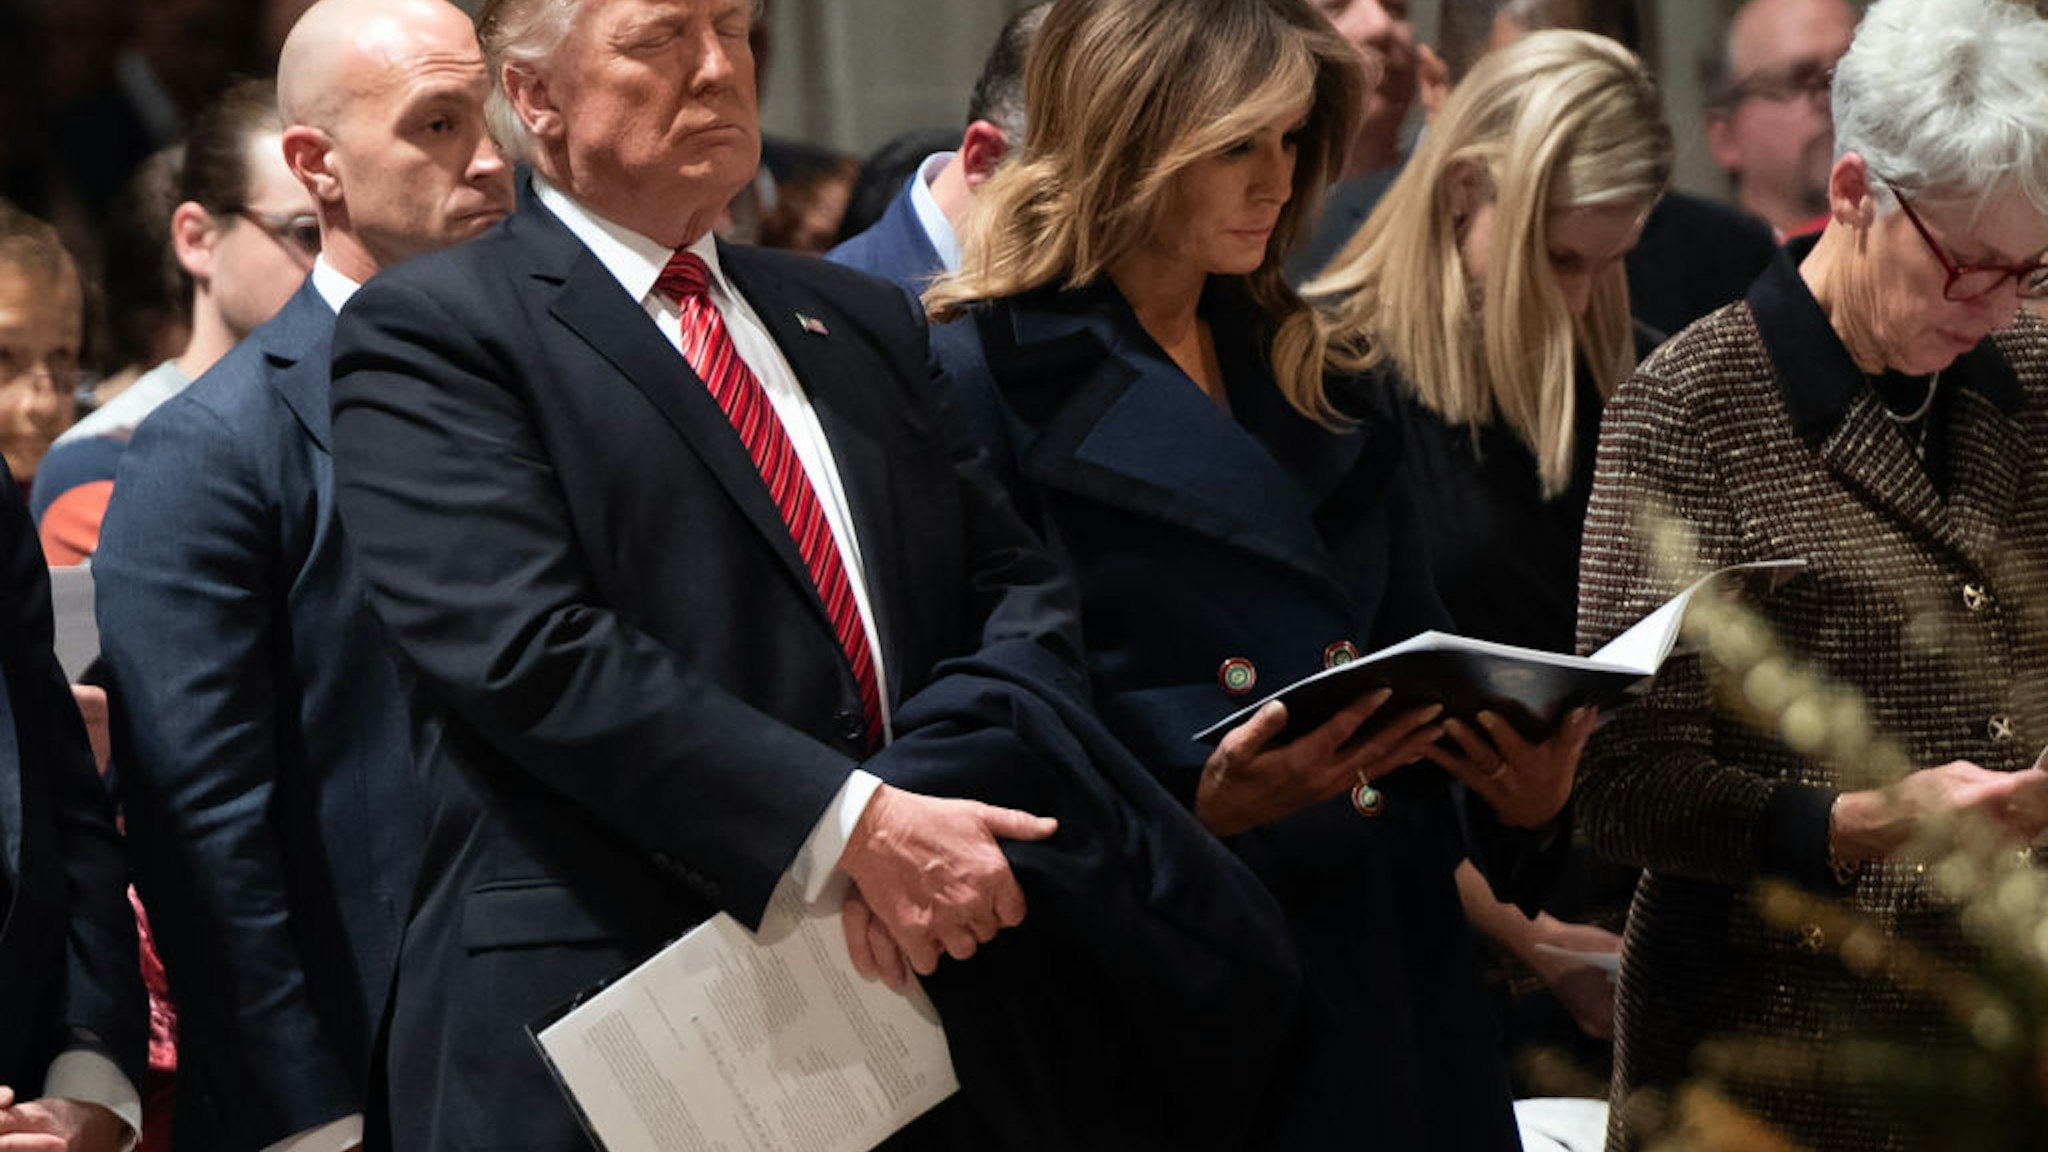 US President Donald Trump and First Lady Melania Trump attend a Christmas Eve service at Washington National Cathedral in Washington, DC, on December 24, 2018.